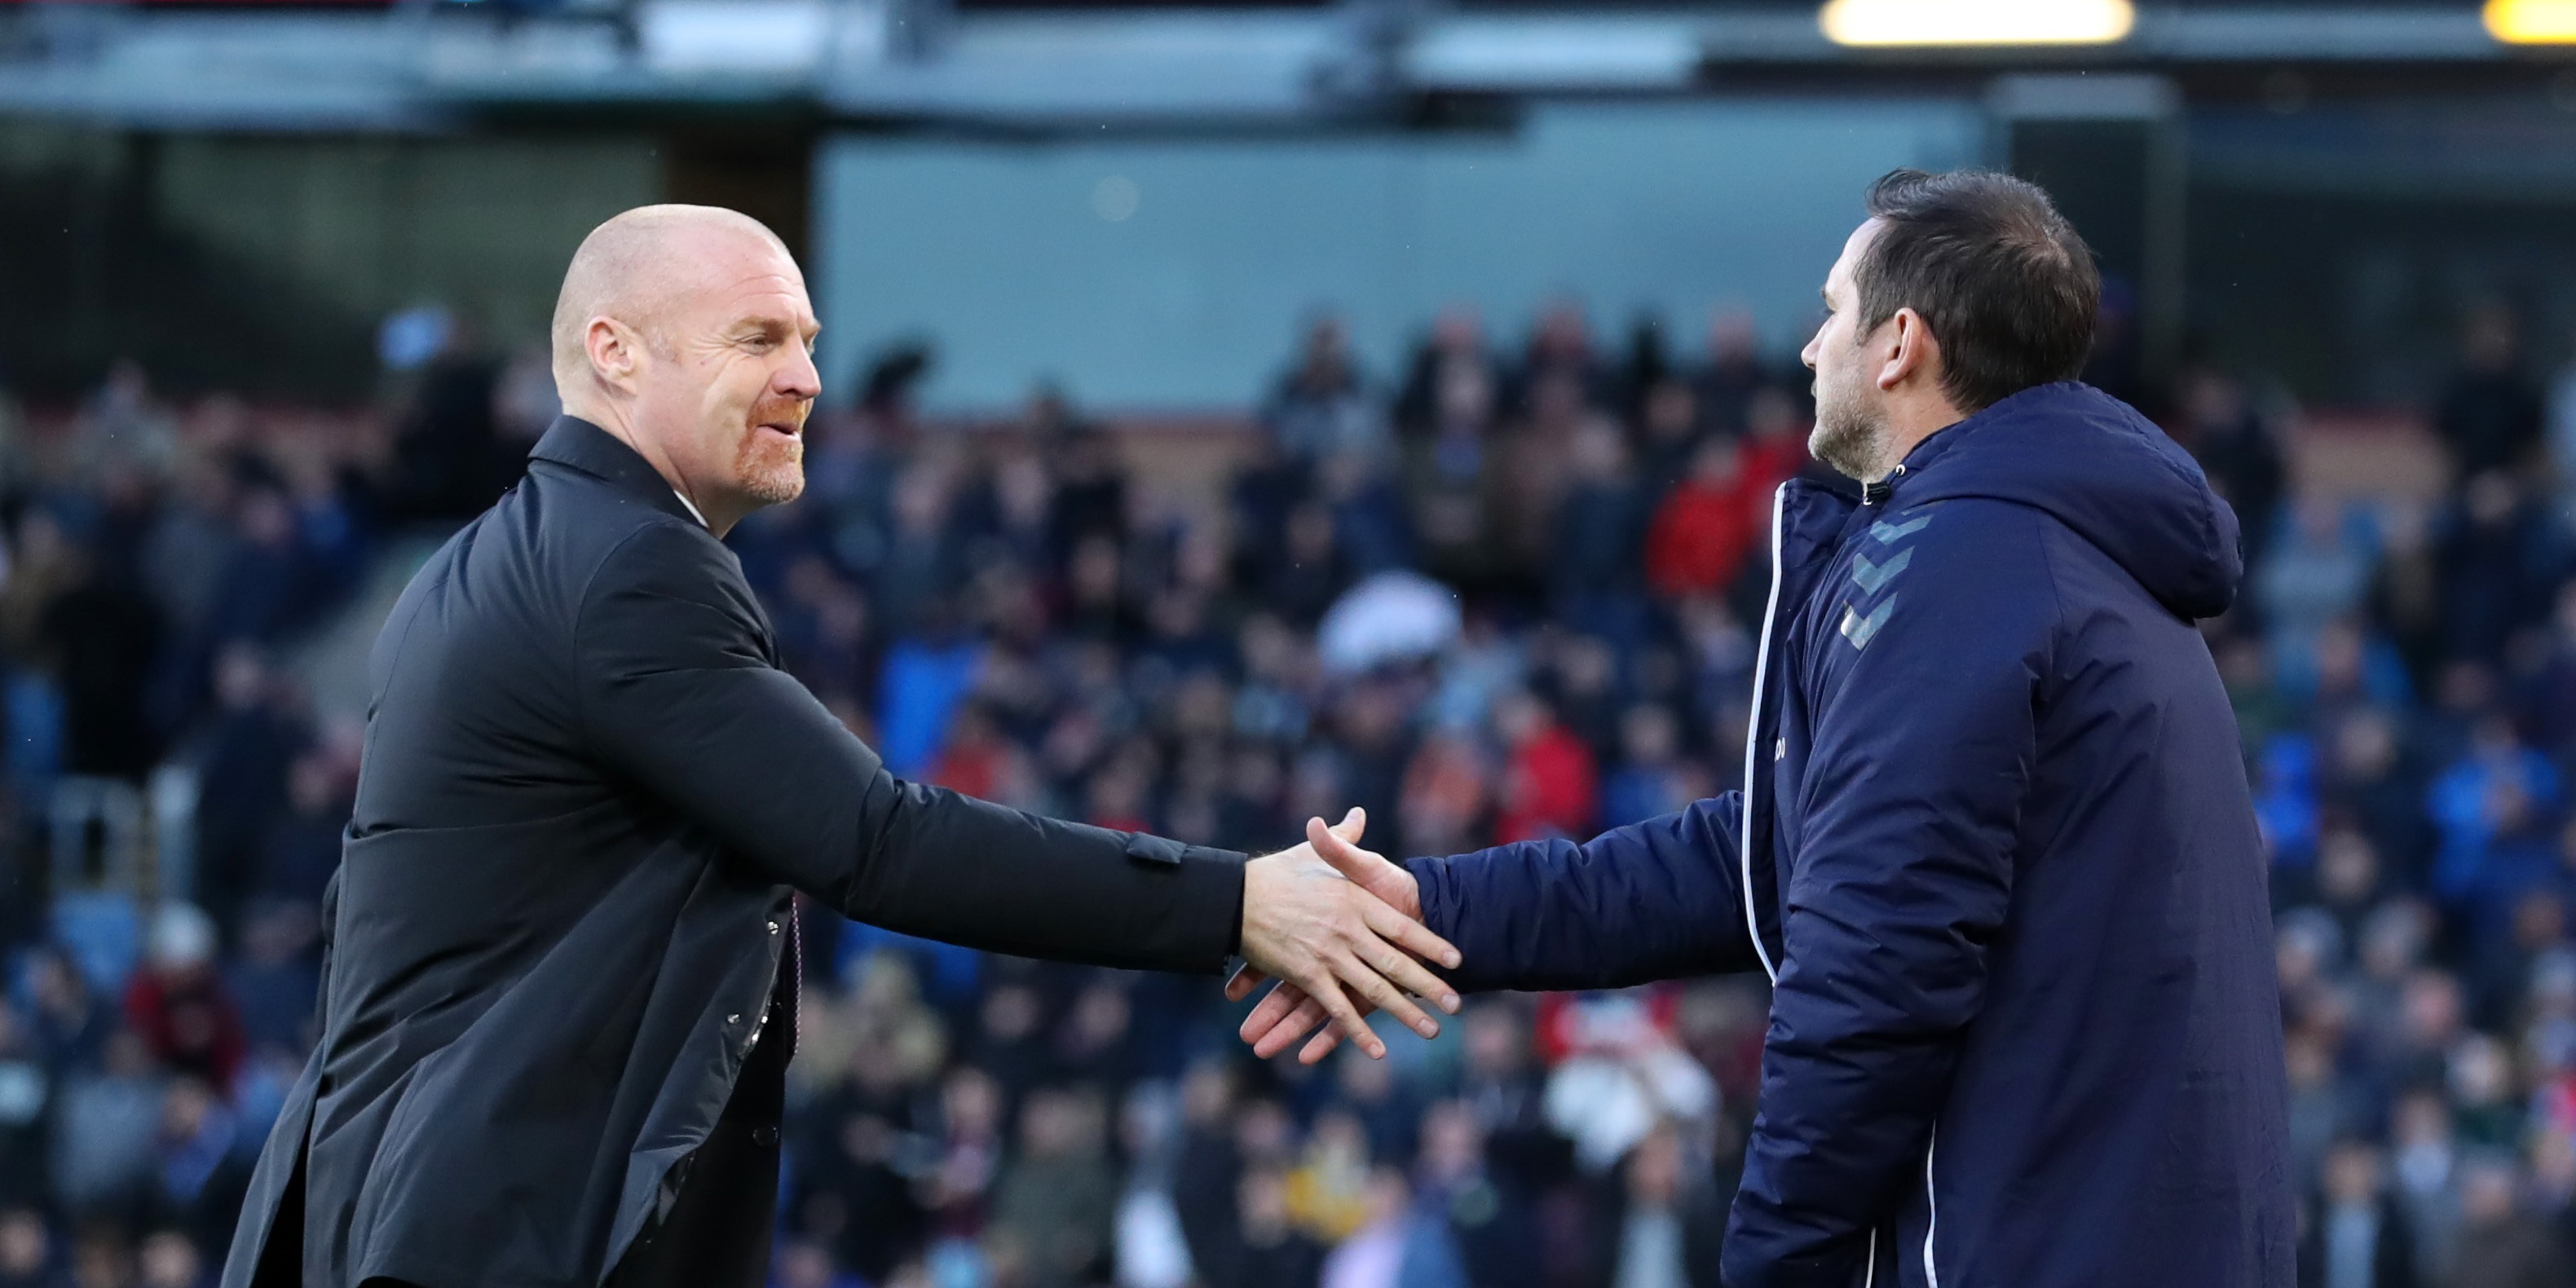 Sean Dyche’s brutal put-down of Everton that inspired second-half Burnley comeback